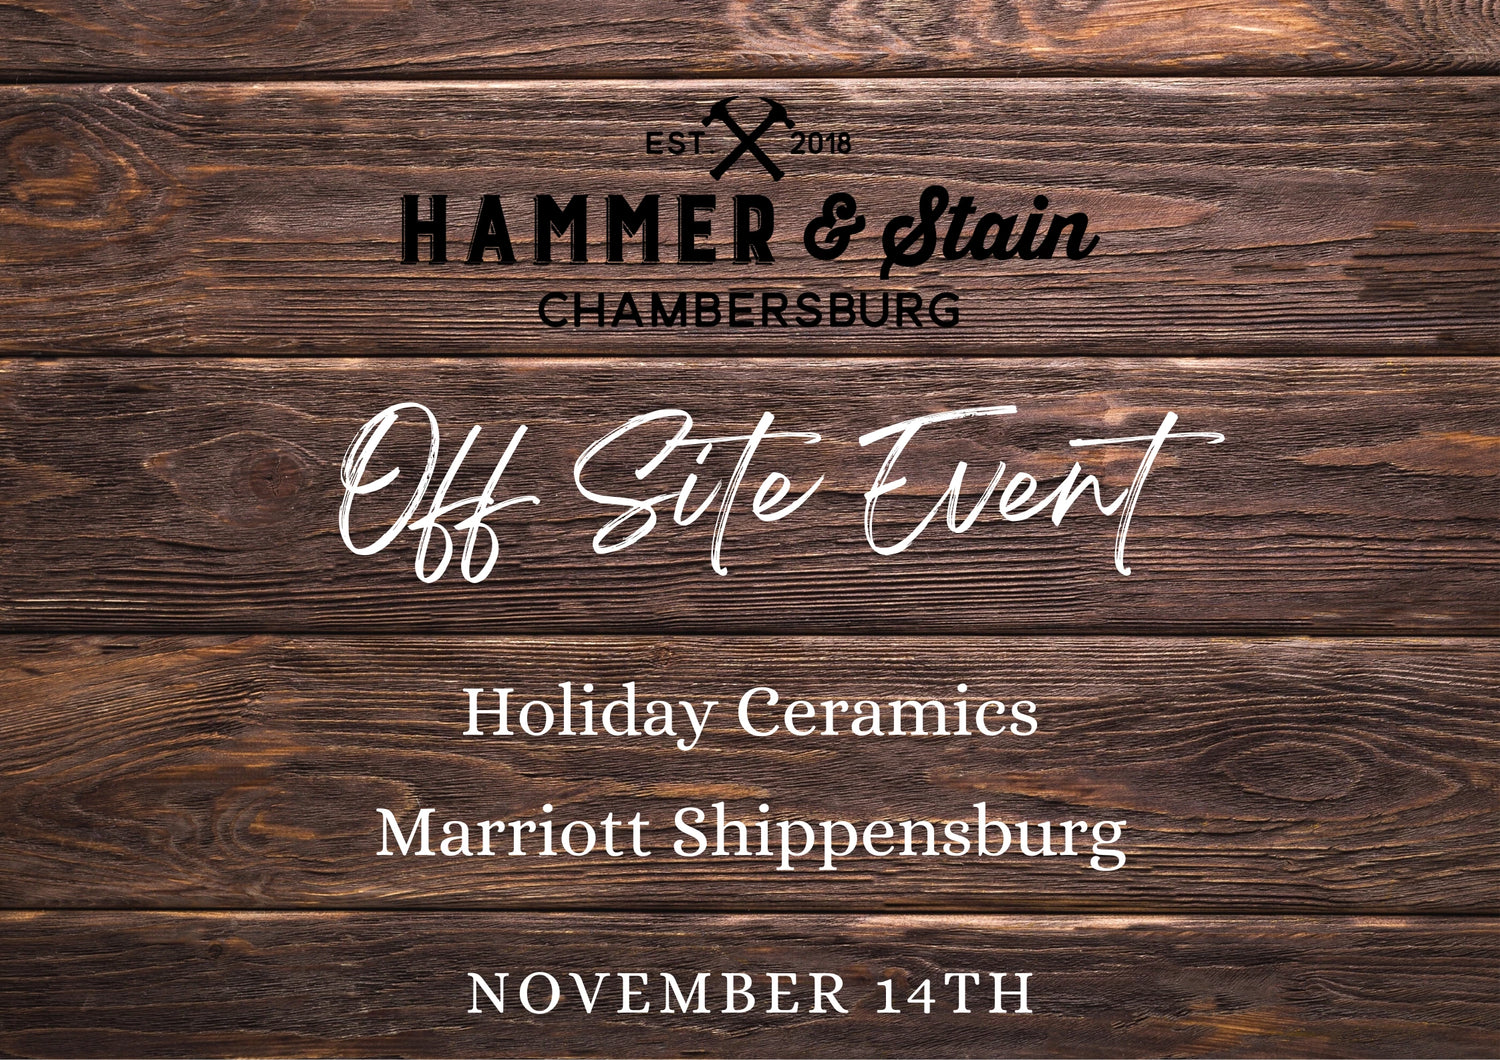 11/14/23 Vintage Holiday Ceramics at The Courtyard Marriott Shippensburg 6pm